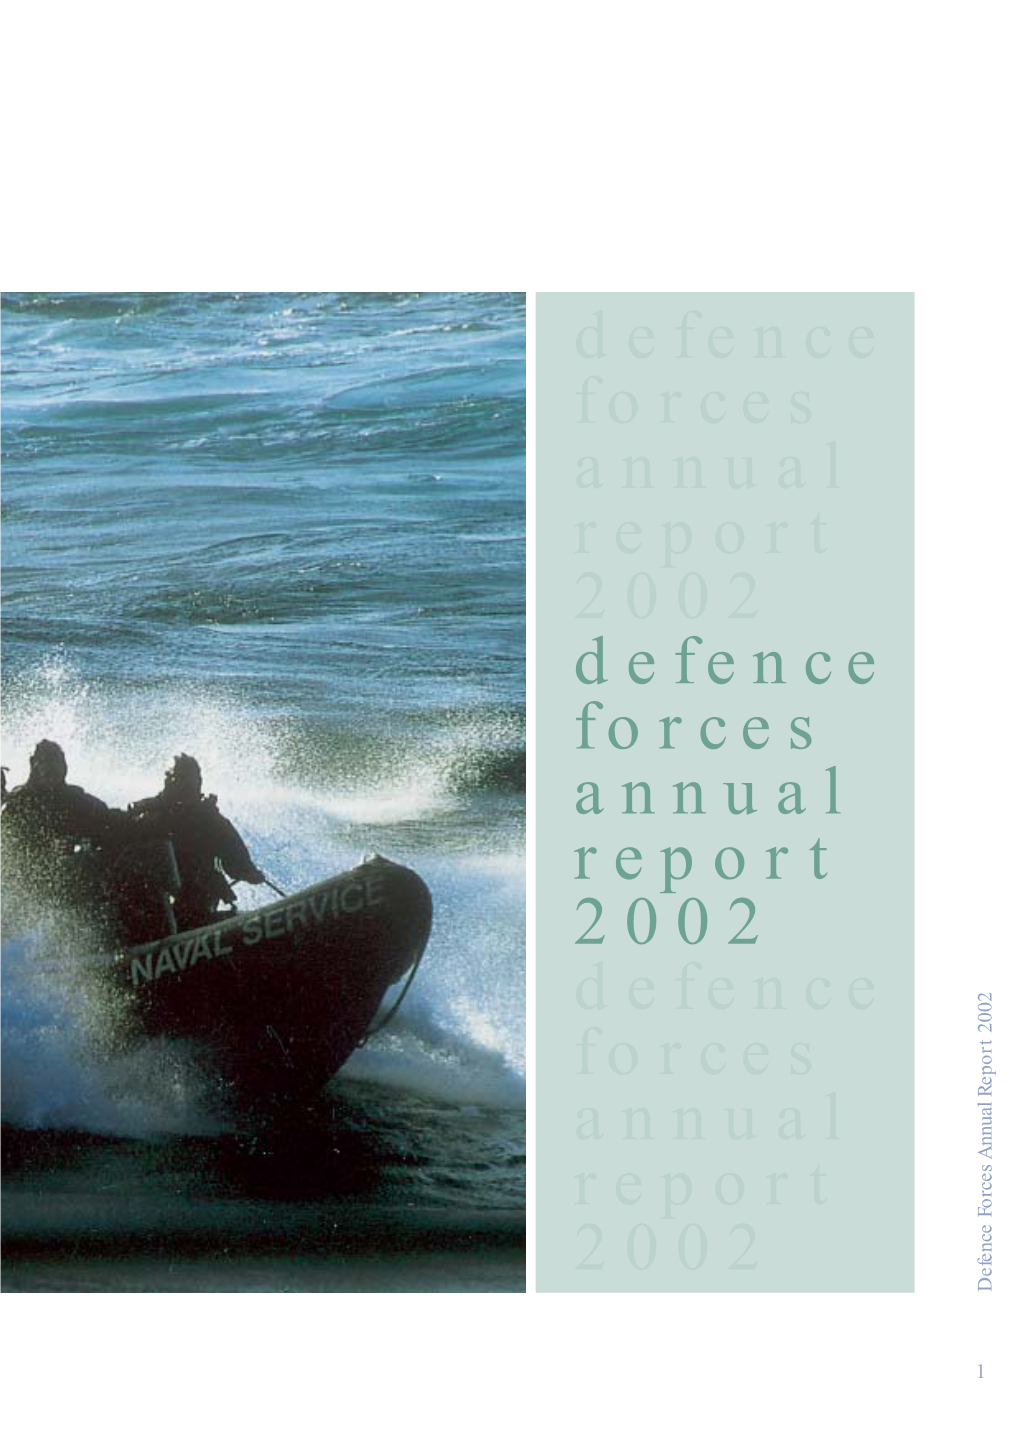 Dept of Defence & Defence Forces Annual Report 2002